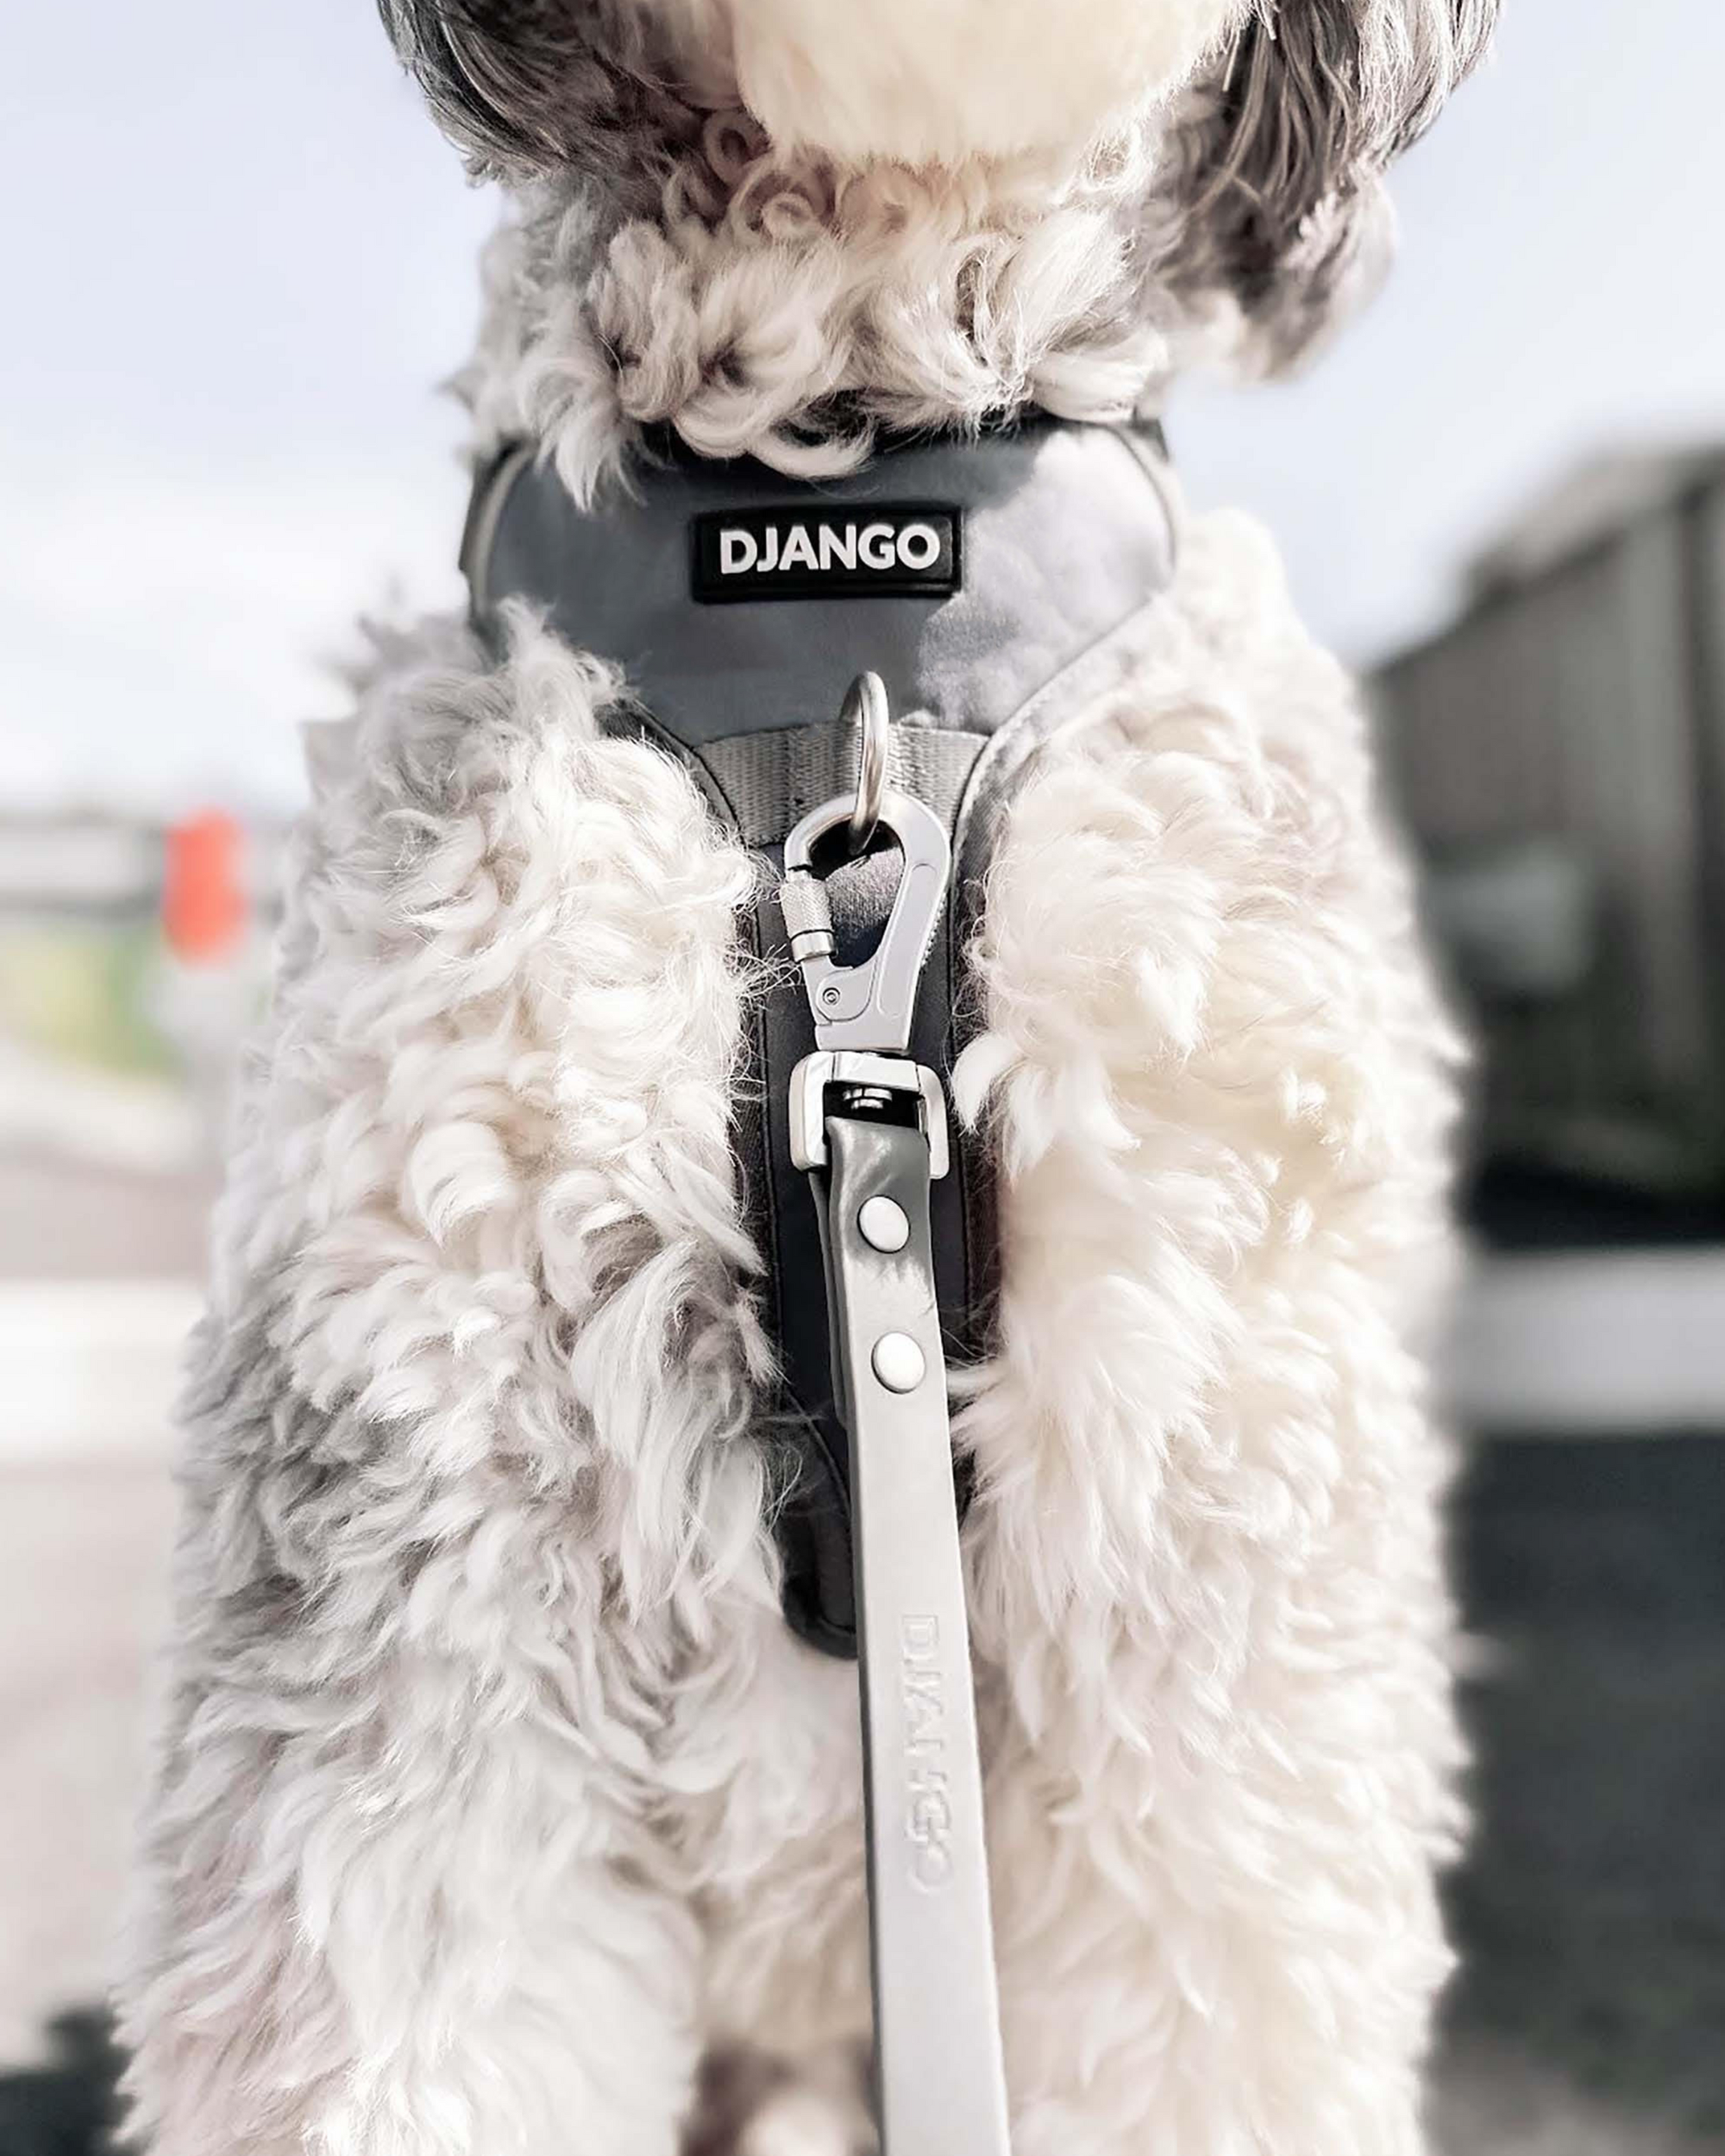 DJANGO Tahoe No Pull Dog Harness in Poppy Seed Gray - Our beautiful Australian shepherd doodle dog furend is wearing his DJANGO no pull dog harness in modern and stylish color Poppy Seed Gray. Key features of DJANGO's Tahoe dog harness include a weather-resistant and padded neoprene exterior, a narrow and deep harness body (to prevent the risk of chafing) reflective piping, and soft webbing. - djangobrand.com